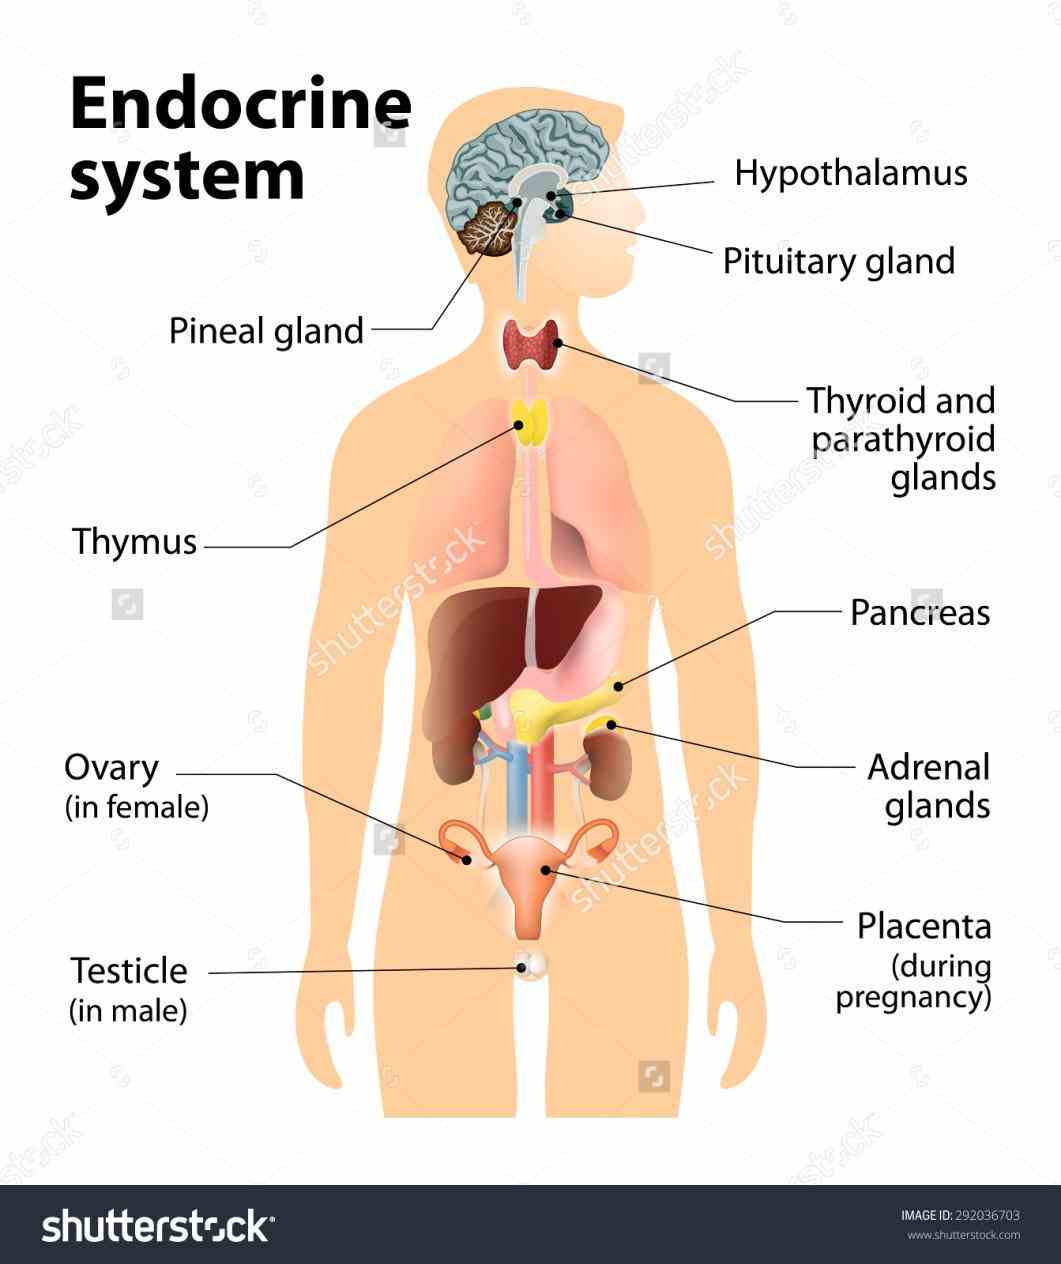 What is the endocrine system made up of